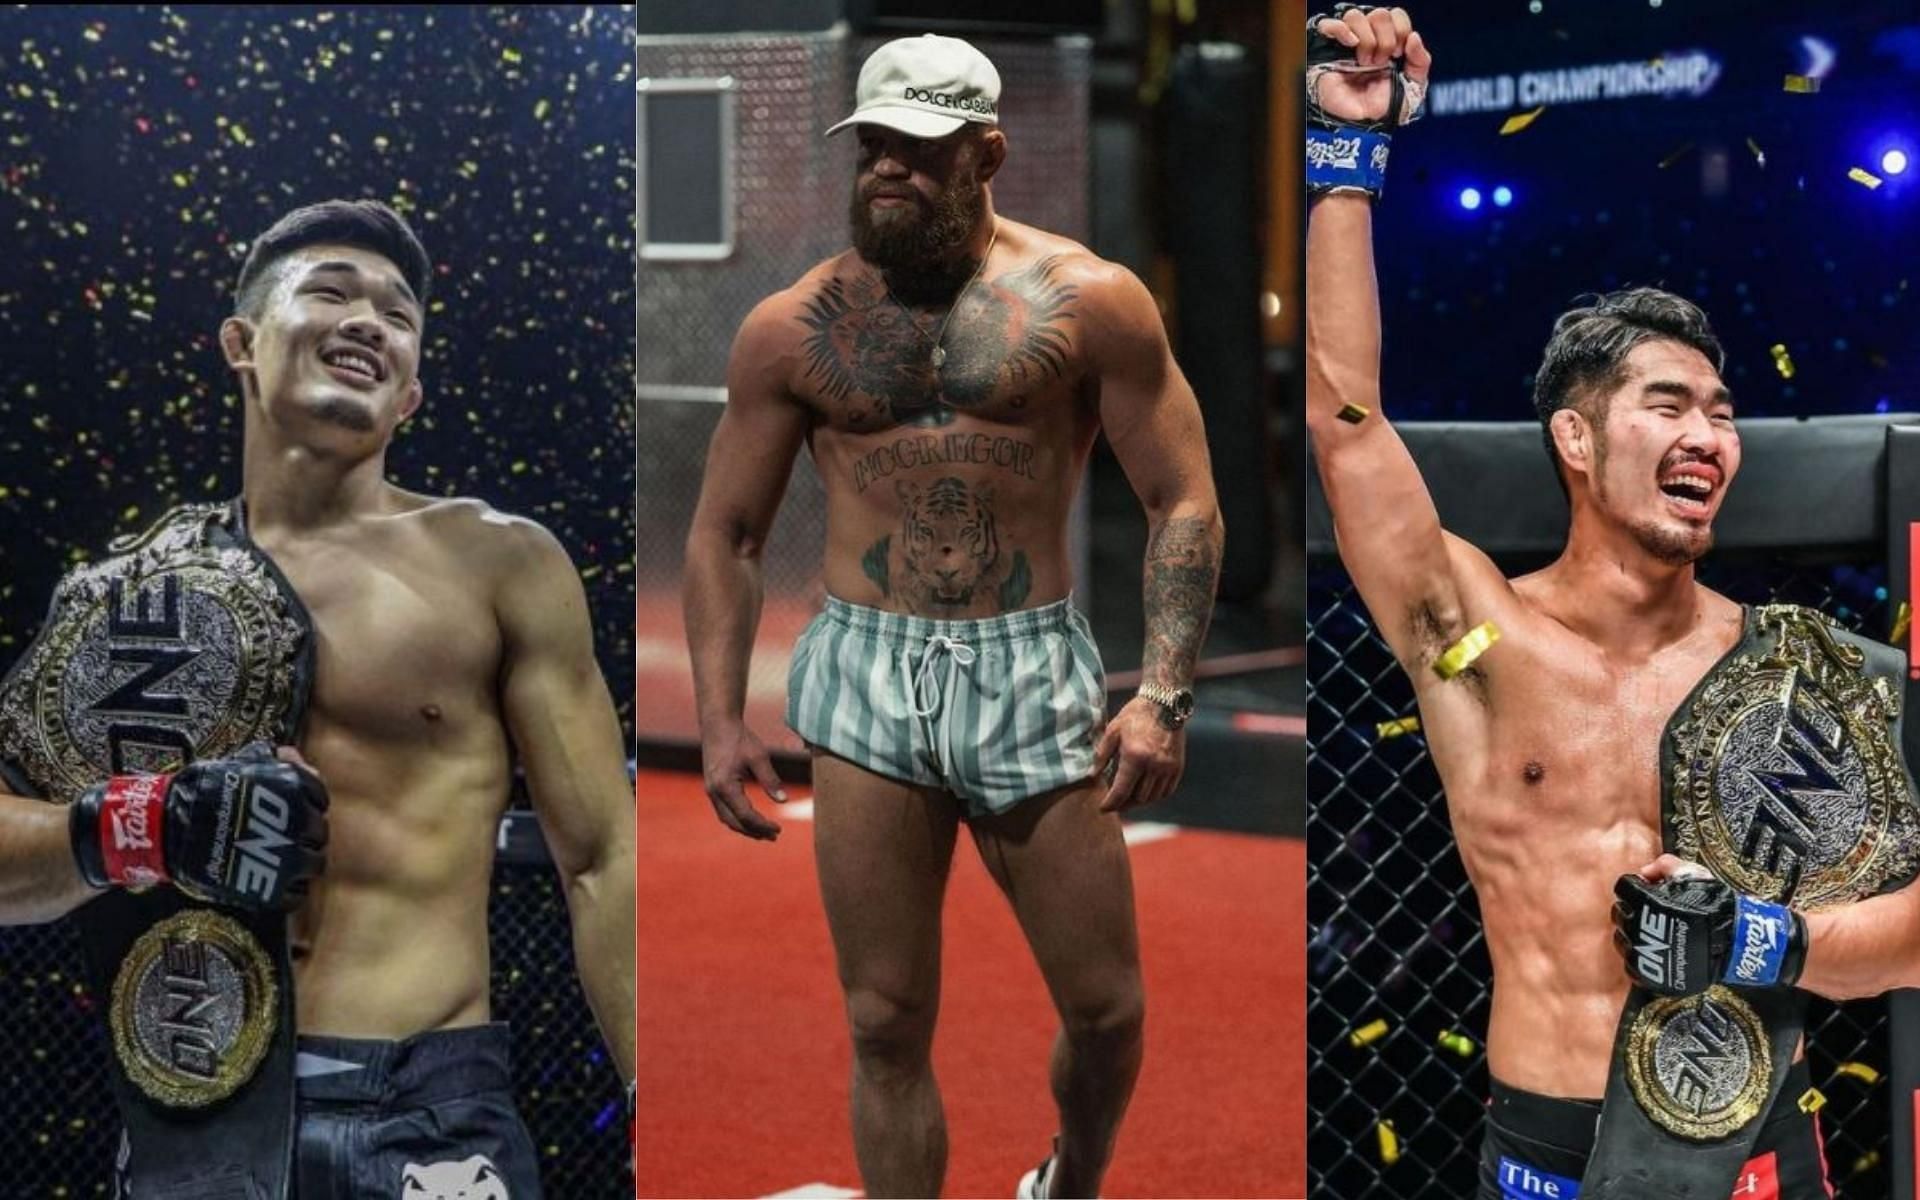 Former ONE Championship lightweight champ Christian Lee (left) and current lightweight king Ok Rae Yoon (right) could give Conor McGregor (center) good a challenge at either 155 or 170 pounds. (Image courtesy: @christianleemma, @thenotoriousmma and @ok_raeyoon on Instagram)